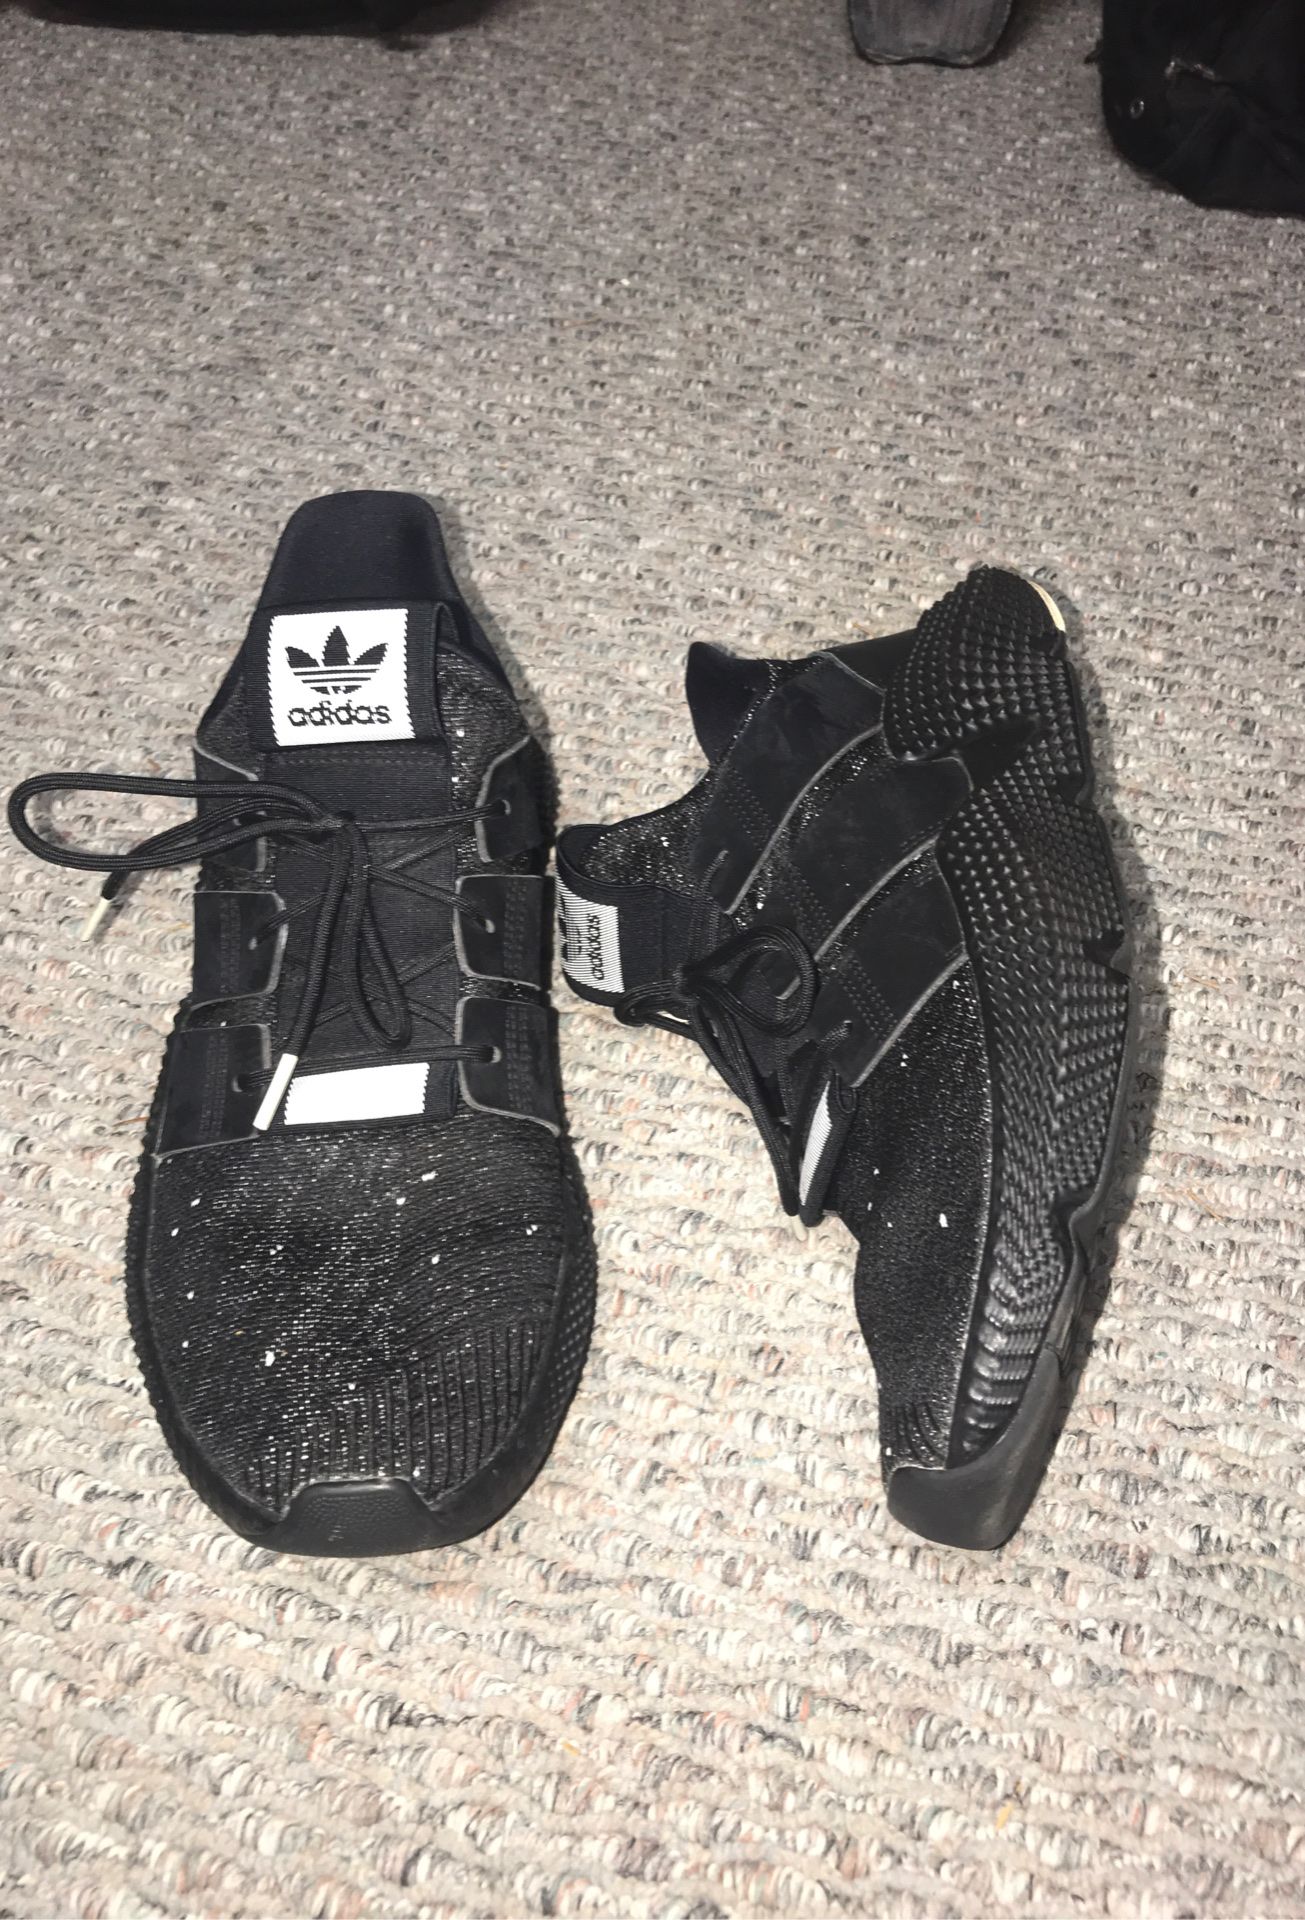 Adidas Prophere shoes